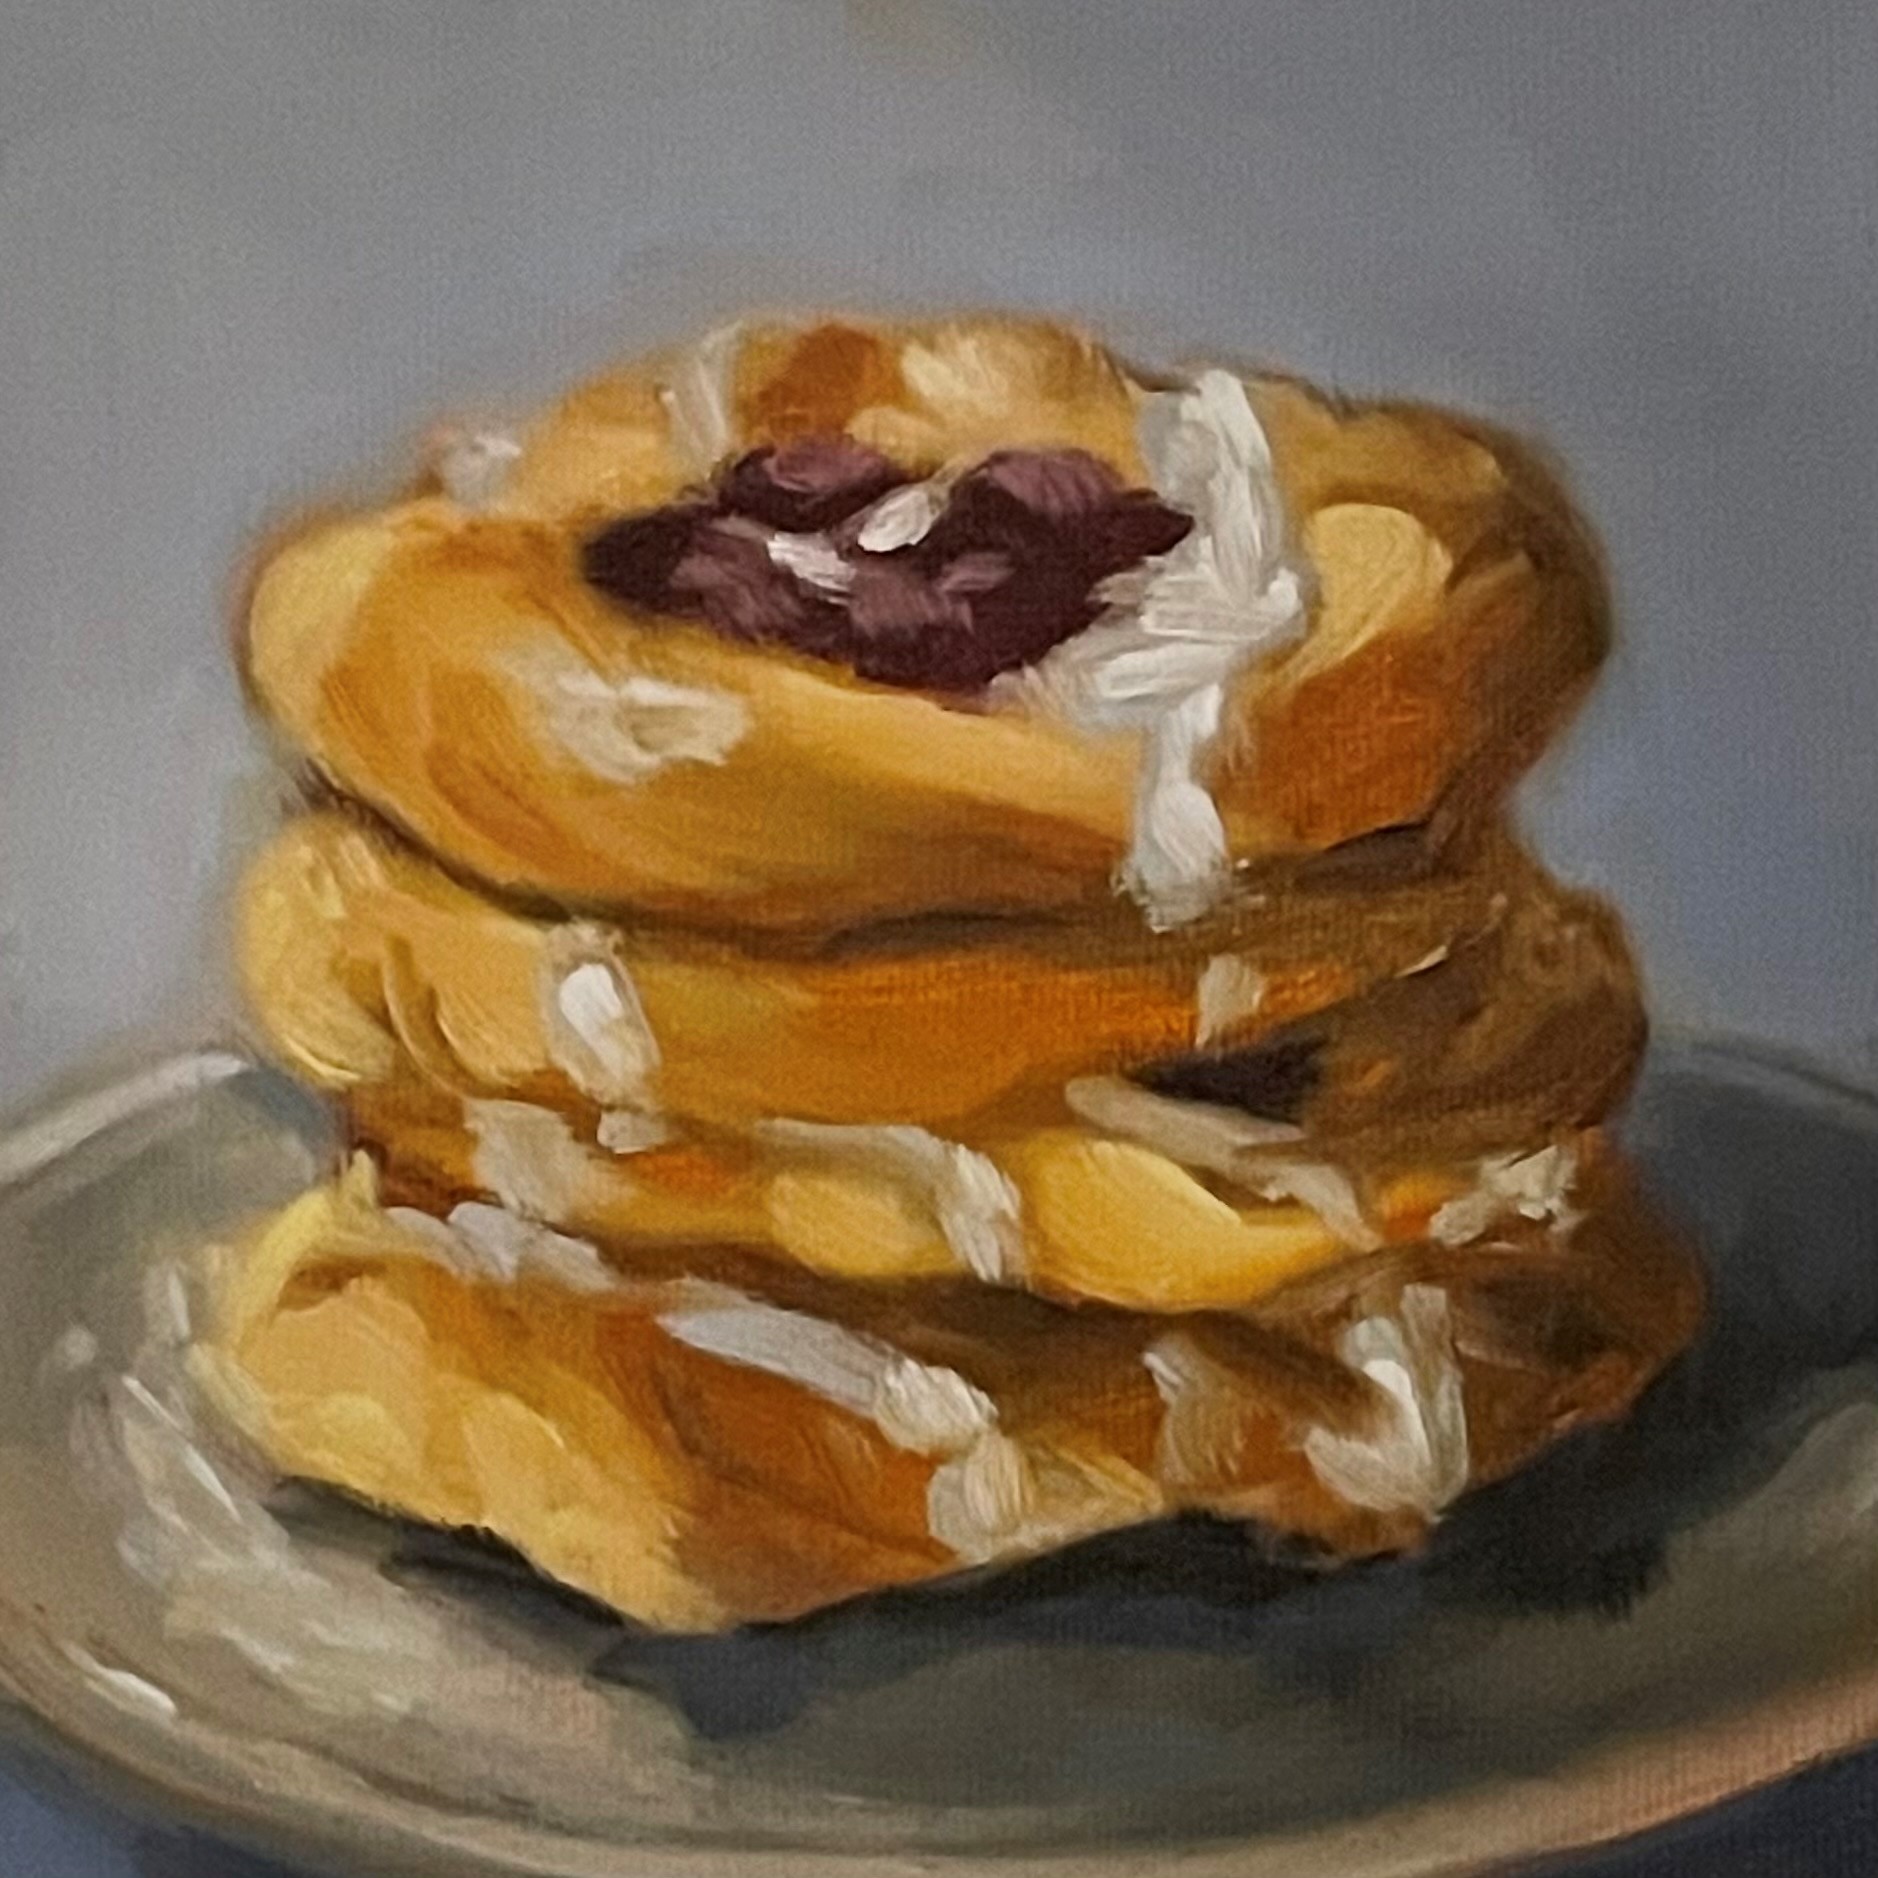 An oil painting of a stack of three sticky-looking danishes with dark berry centres